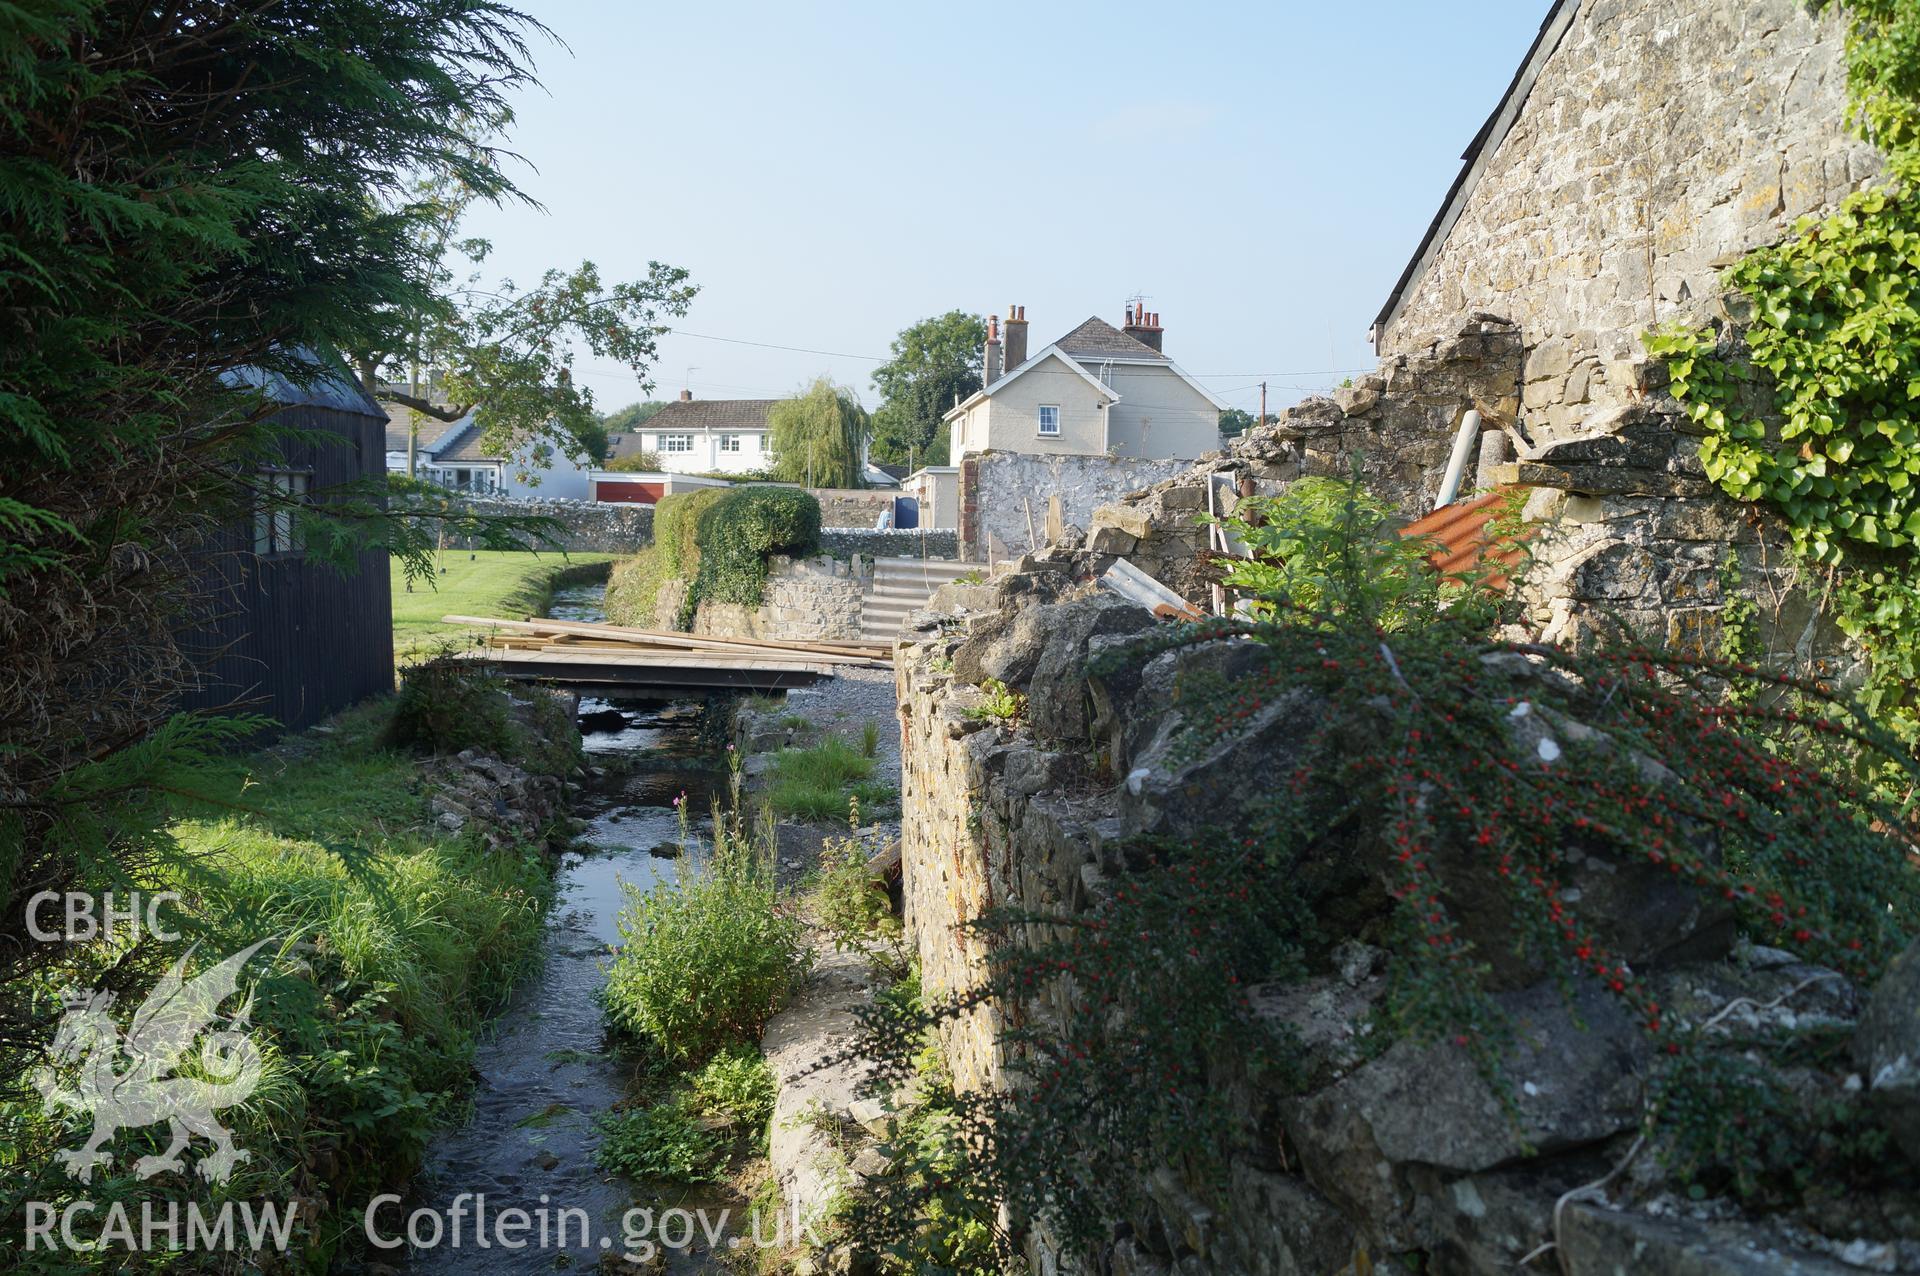 View 'looking north northwest along small watercourse to the west of the building with ruined pigsty and yard to the right of the photograph' at Rowley Court, Llantwit Major. Photograph & description by Jenny Hall & Paul Sambrook of Trysor, 7/9/2016.